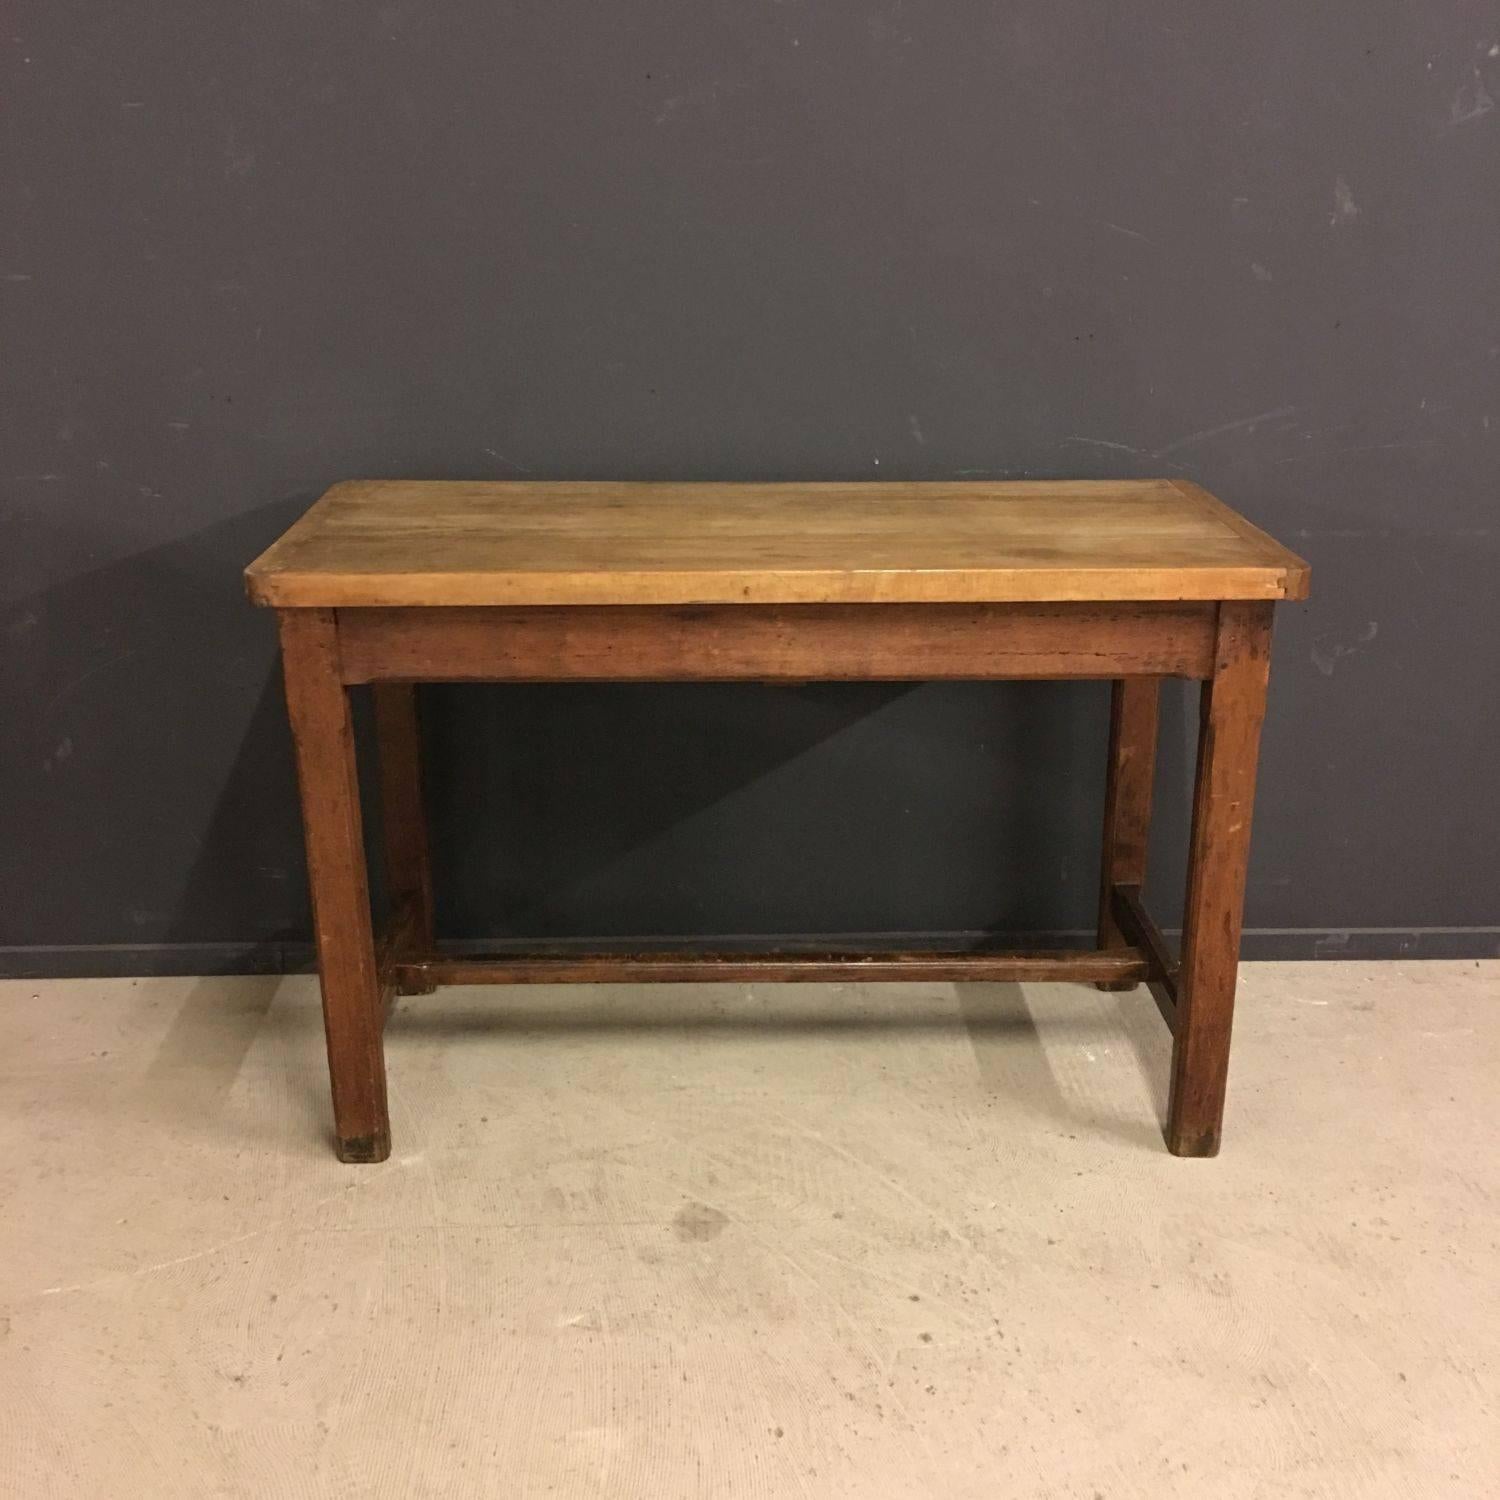 This antique oak farmhouse table is made in France during the 1900s. It features one drawer with a brass handle. Remains in very good condition.